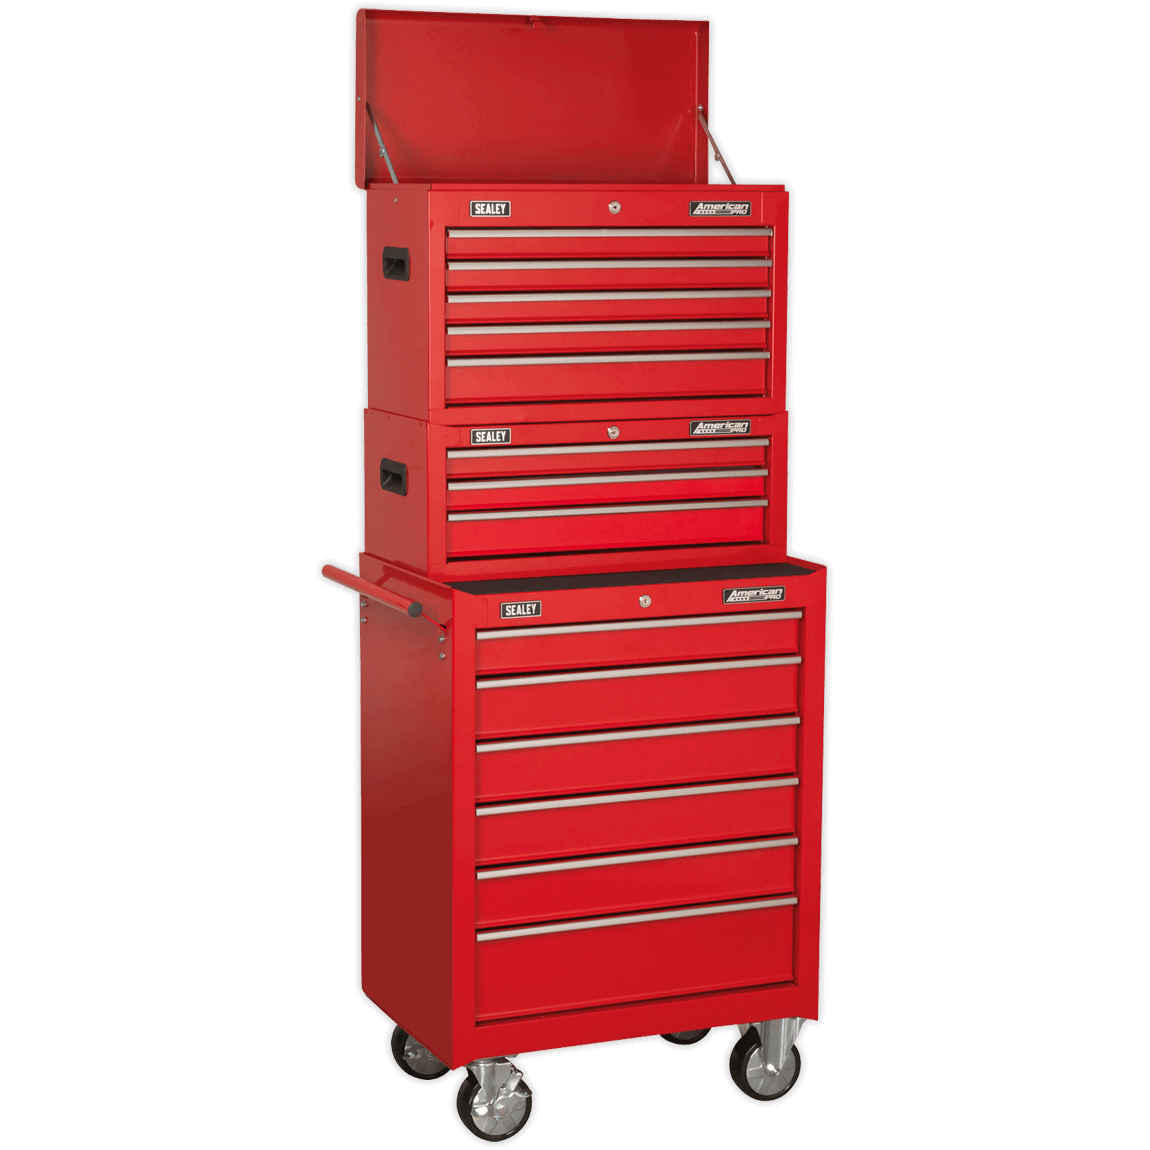 Sealey American Pro 14 Drawer Roller Cabinet, Mid and Top Tool Chest Red